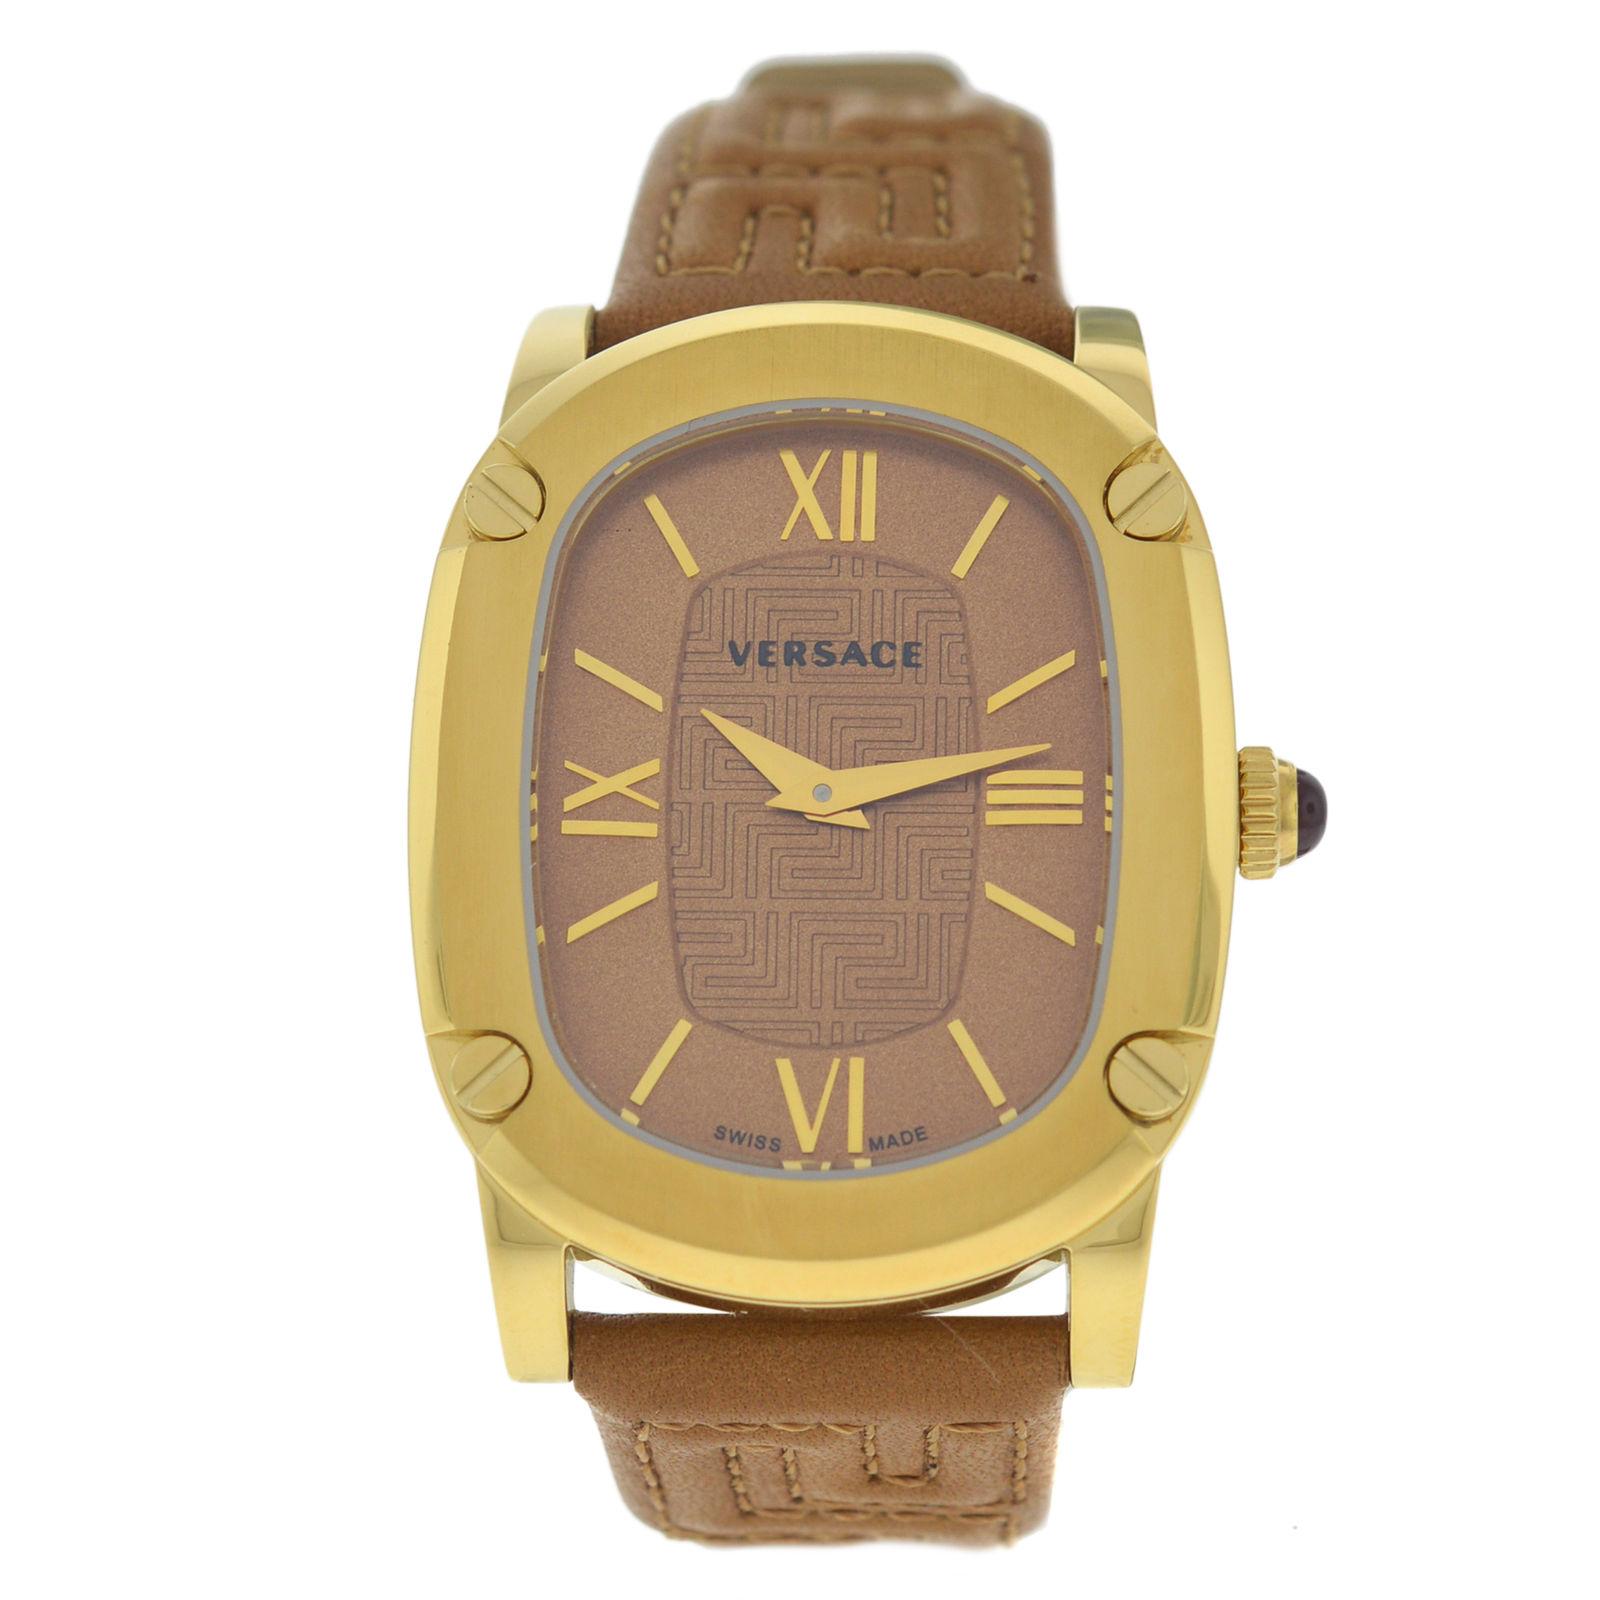 Authentic New Versace Couture Gold-Plated Quartz Watch